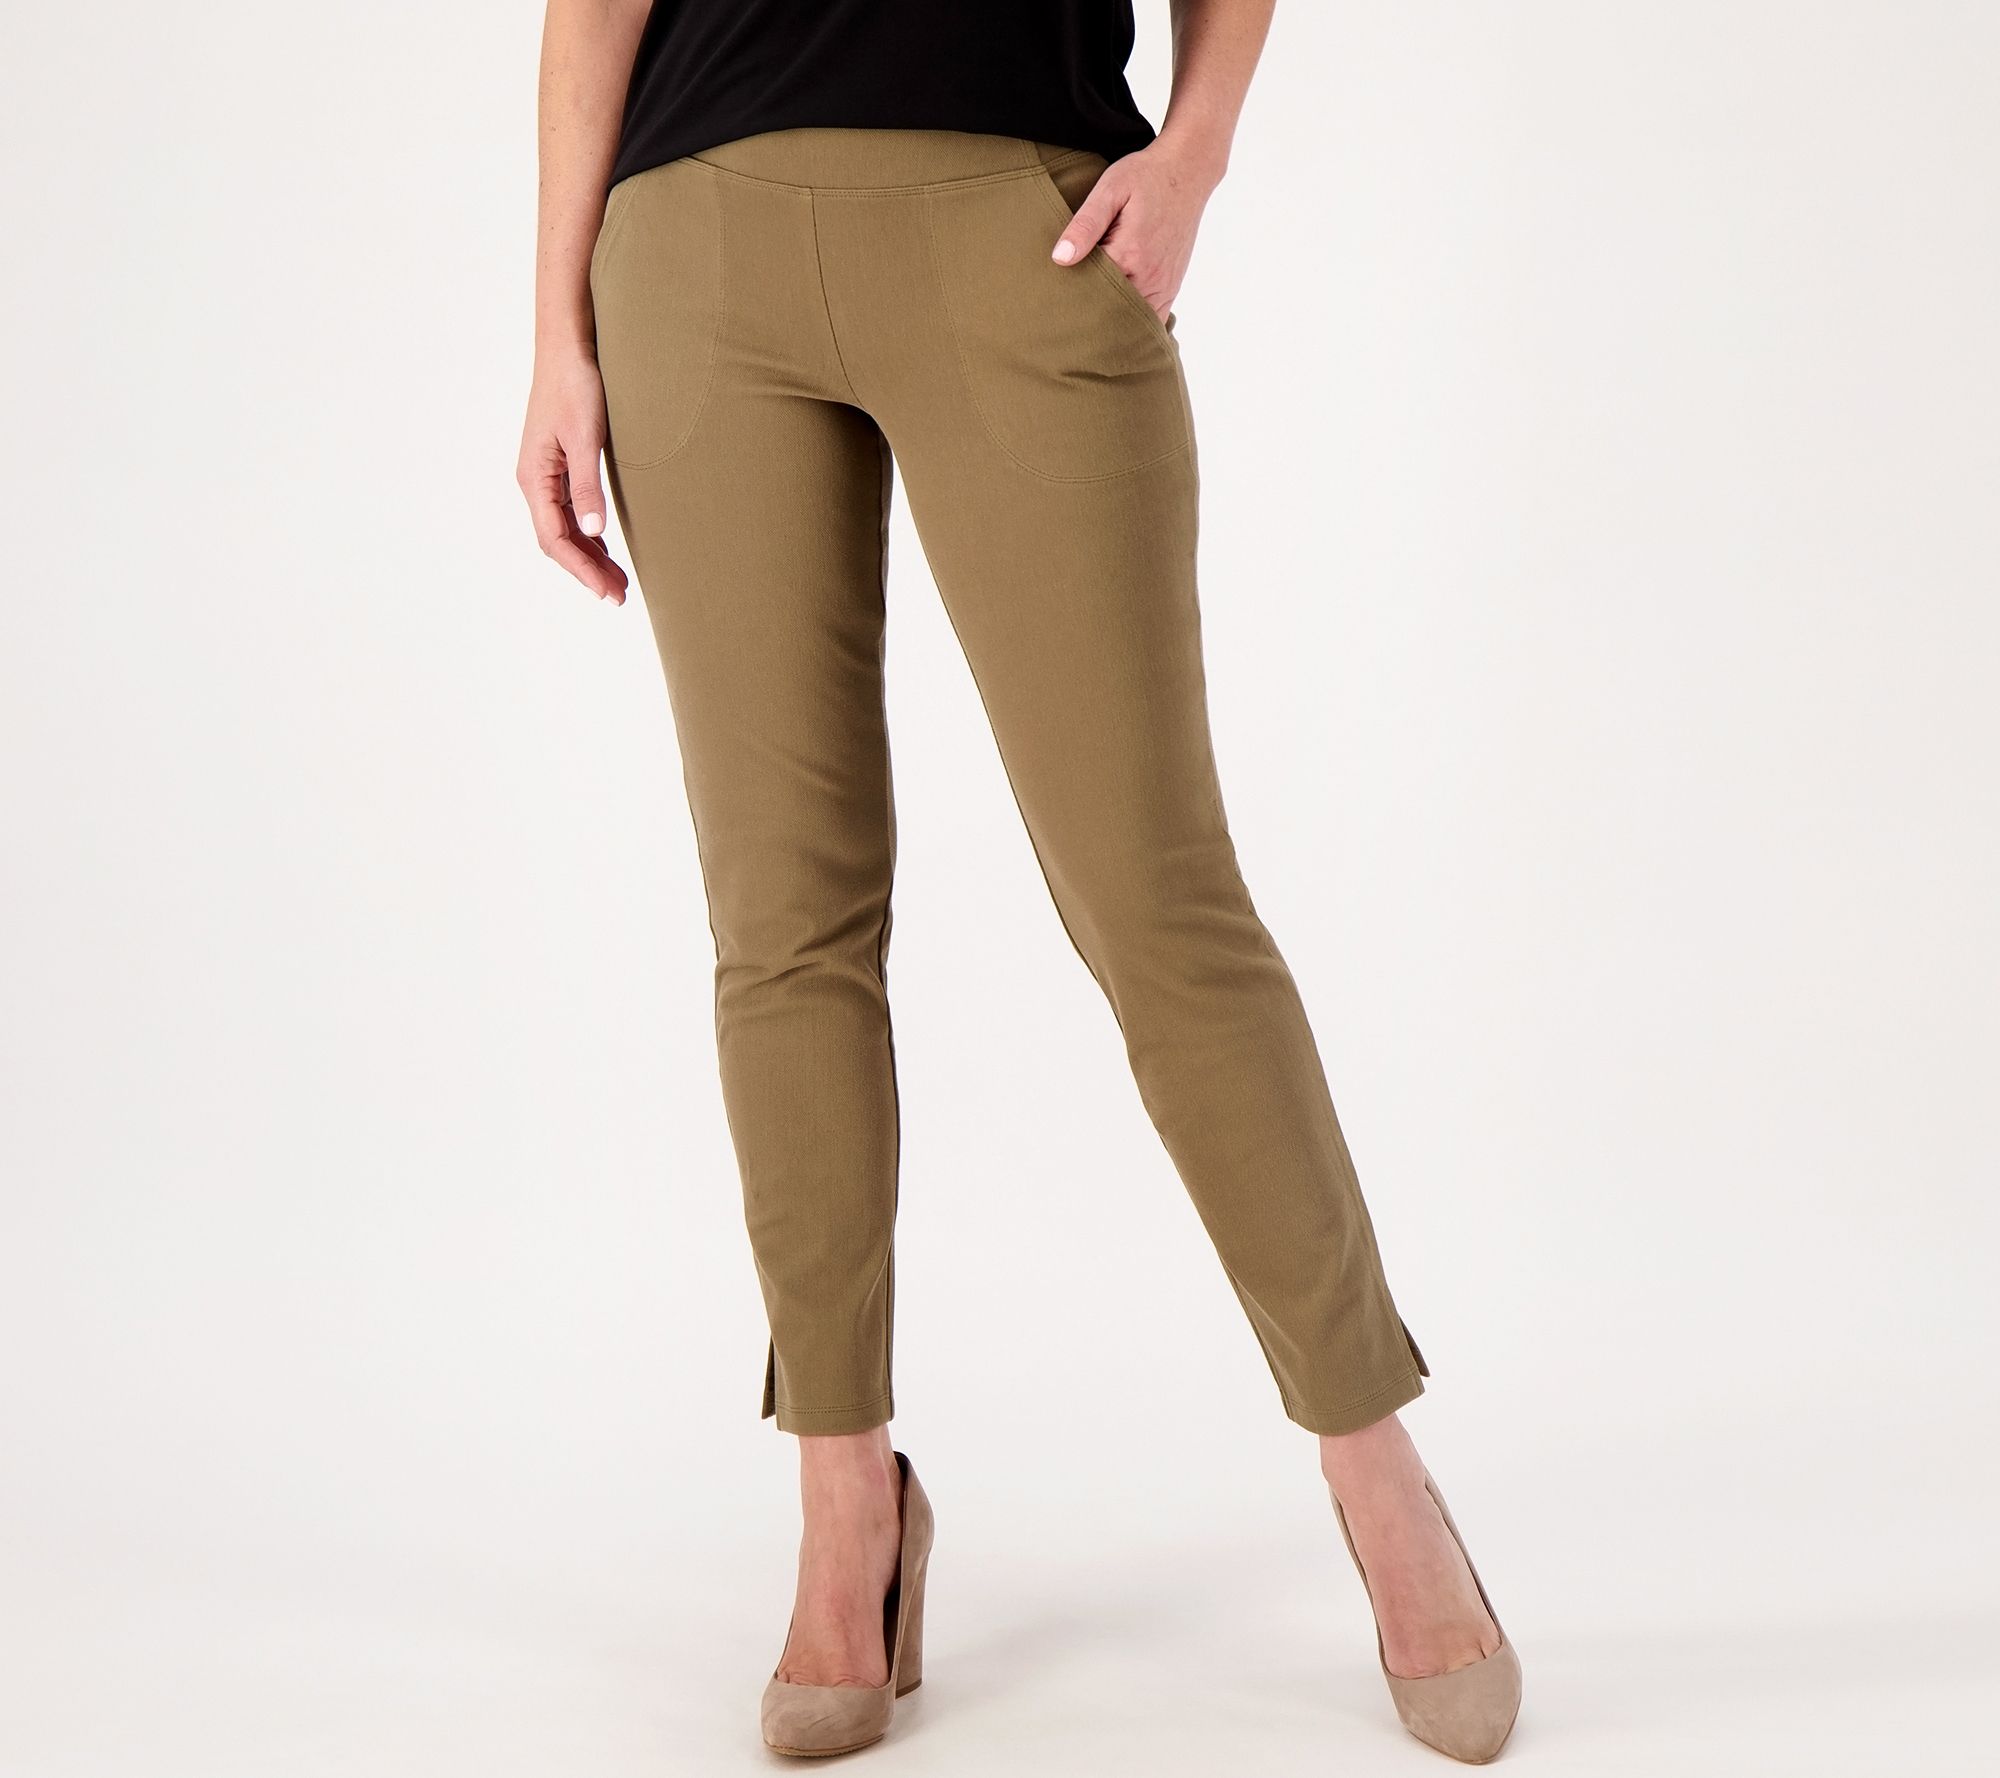 Women with Control Elite Prime Stretch Denim Seamed Pant on QVC 